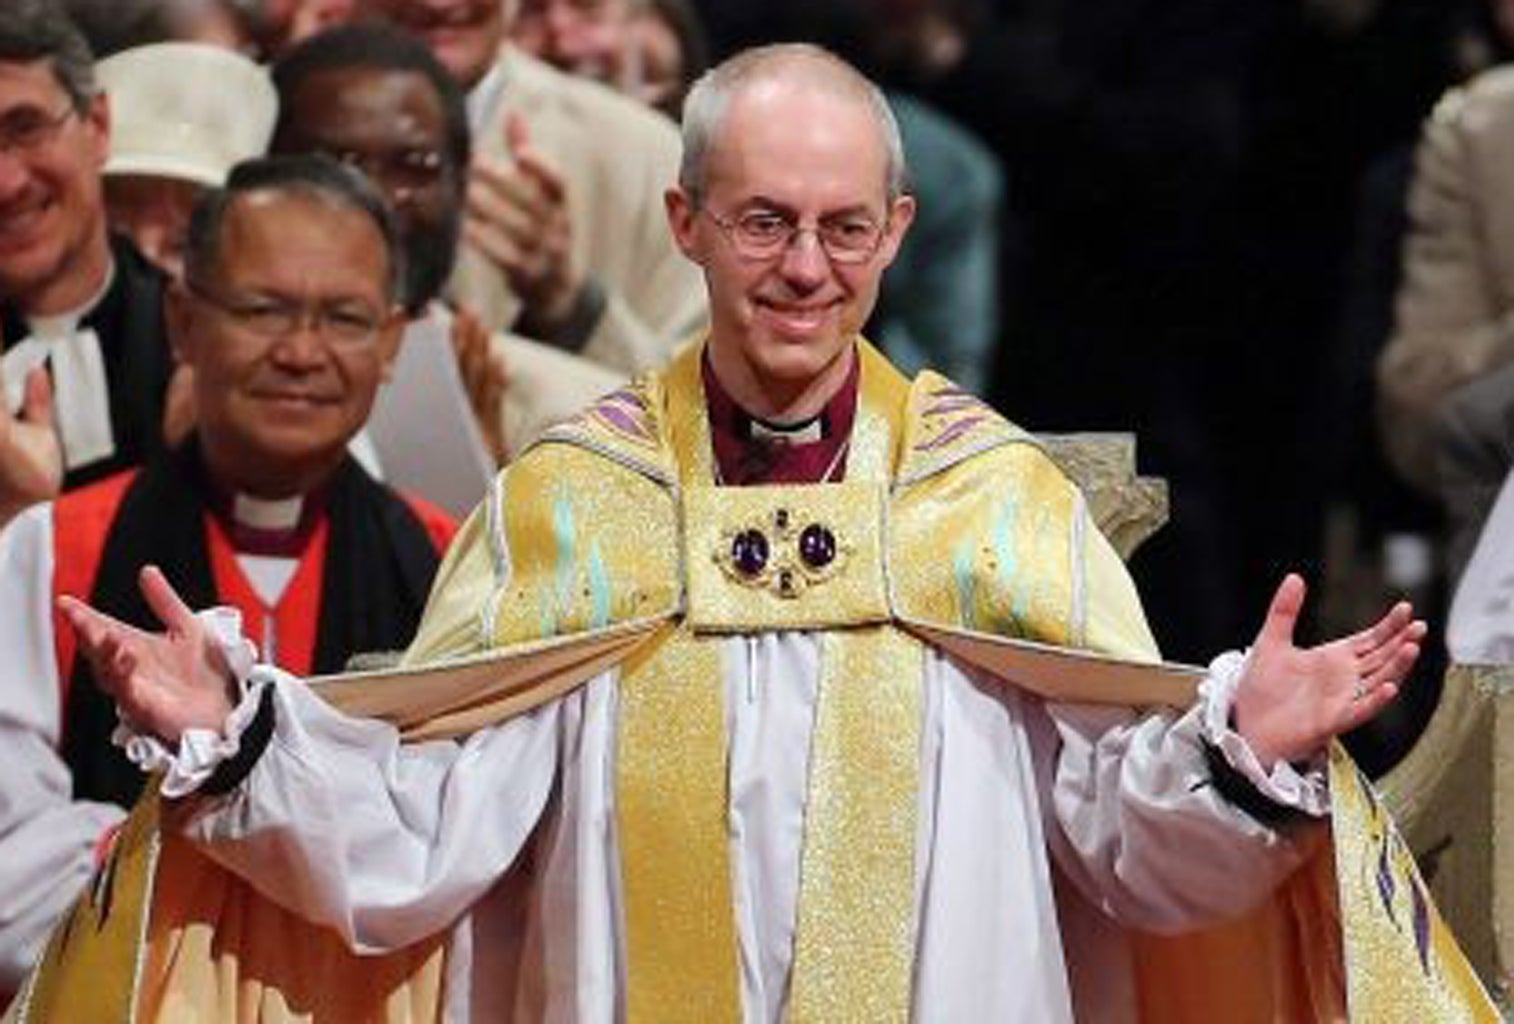 Archbishop Welby is said to be furious at the revelations